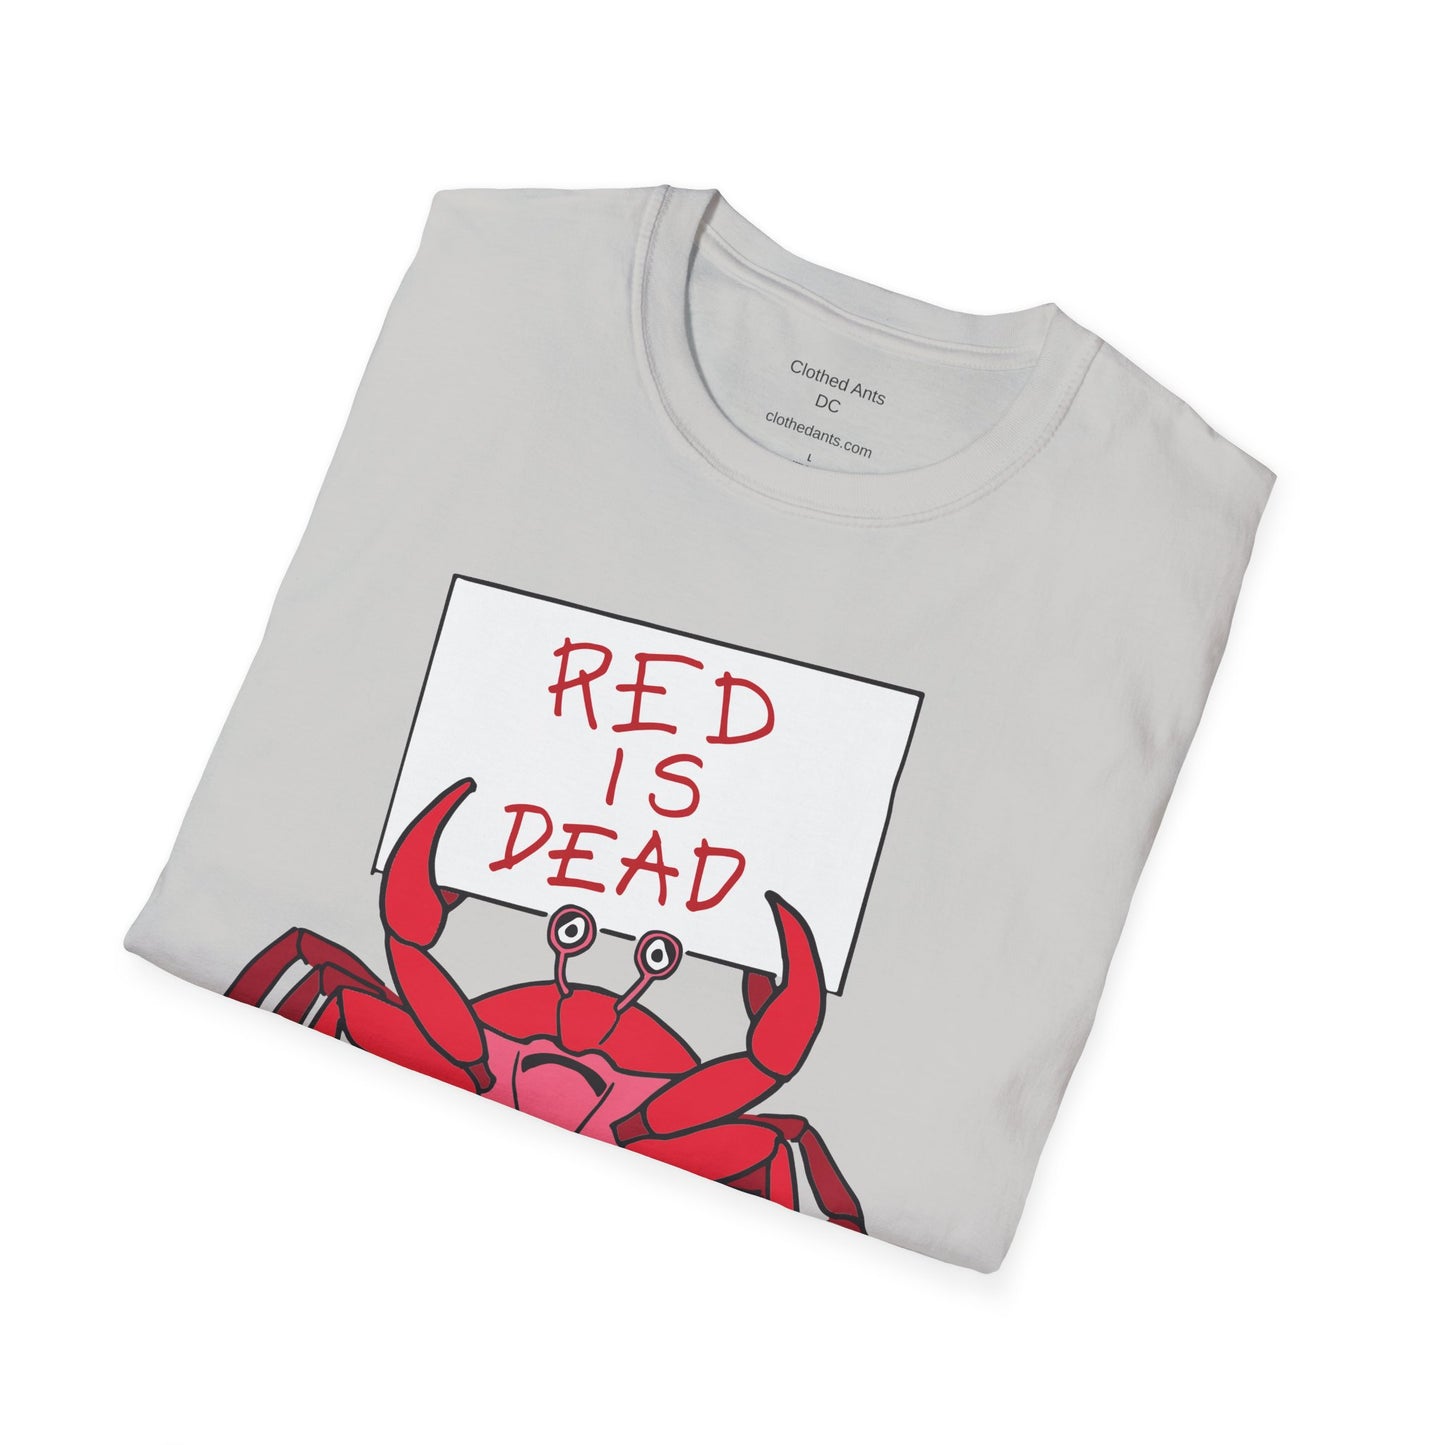 RED IS DEAD